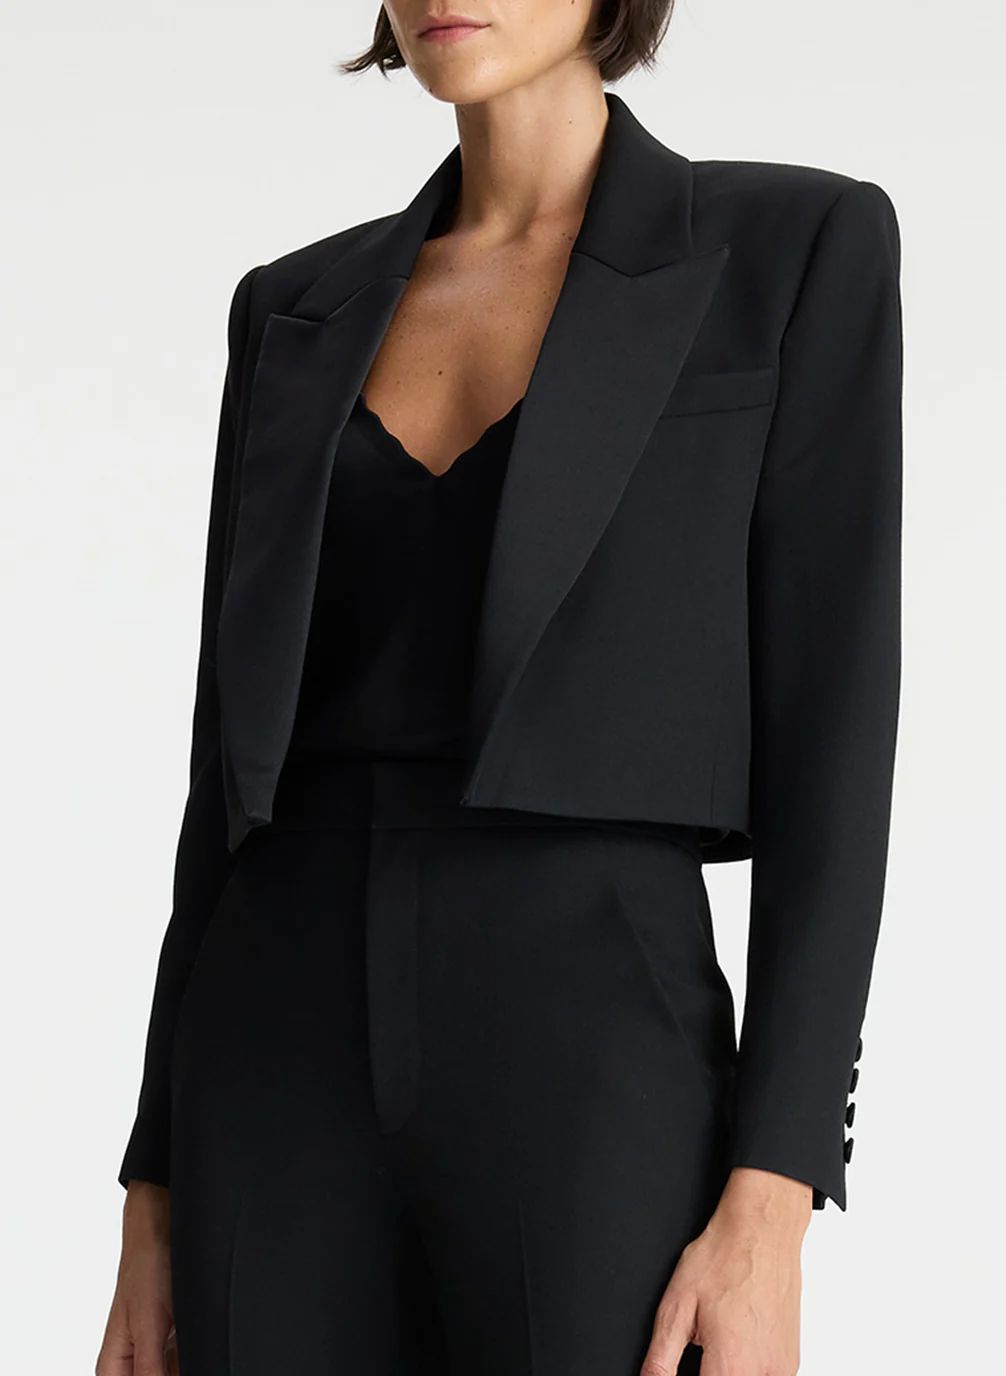 Anderson Cropped Tuxedo Jacket | A.L.C